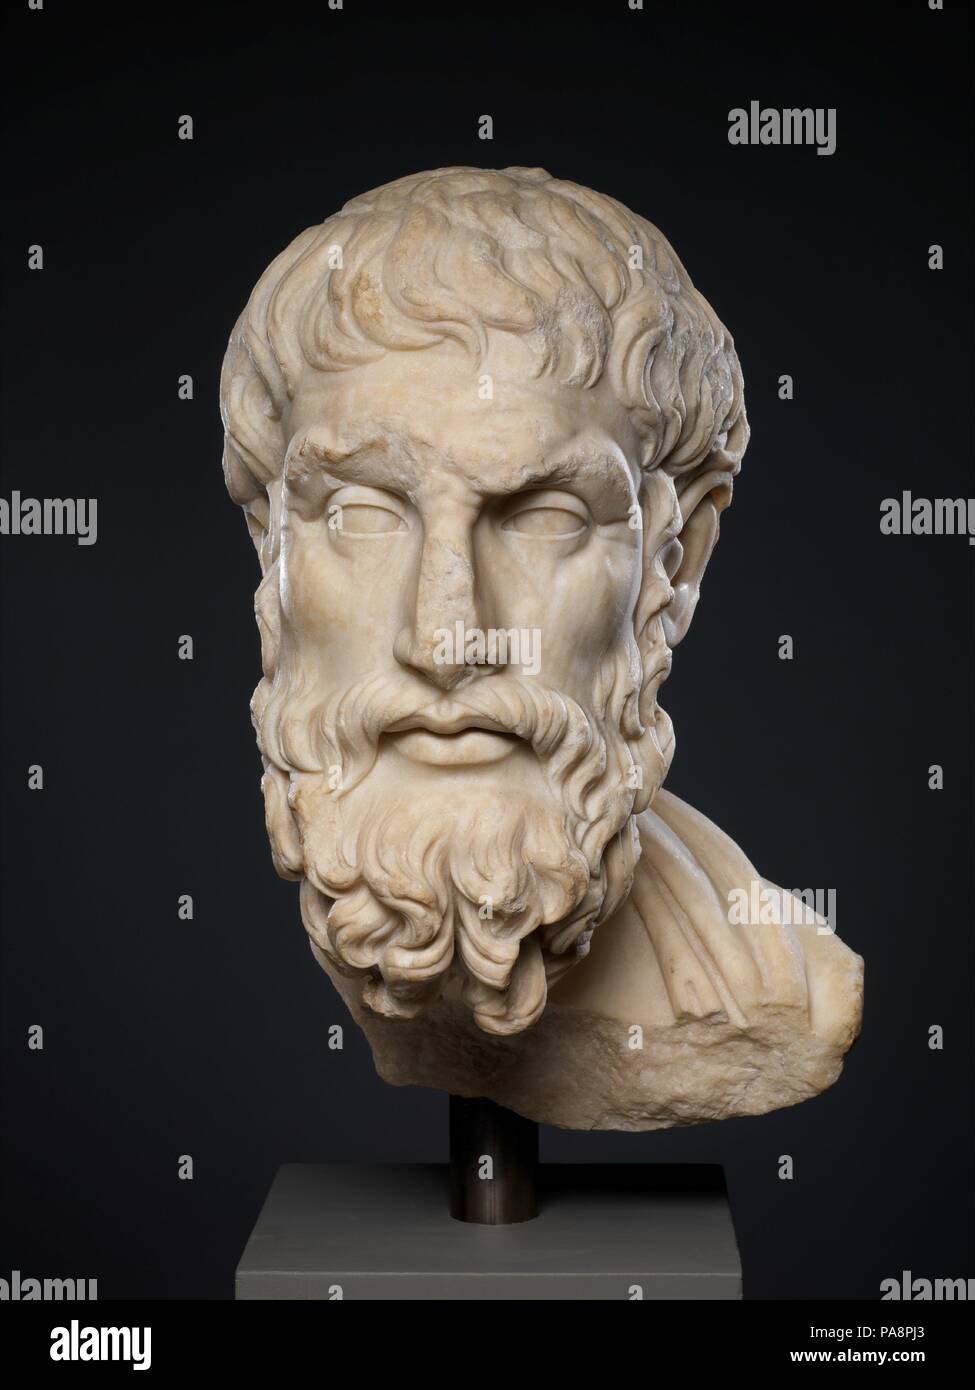 Marble head of Epikouros. Culture: Roman. Dimensions: 19 5/8 × 9 3/4 × 11 1/2 in. (49.8 × 24.8 × 29.2 cm). Date: 2nd century A.D..  Copy of a Greek statue of the 1st half of the 3rd century B.C.  The philosopher, who lived from 341 to 271 B.C., must have been honored by a portrait statue made late in his lifetime or soon after his death. Numerous Roman copies reproduce the same original, showing the esteem in which Epicurus' teachings were held. Museum: Metropolitan Museum of Art, New York, USA. Stock Photo